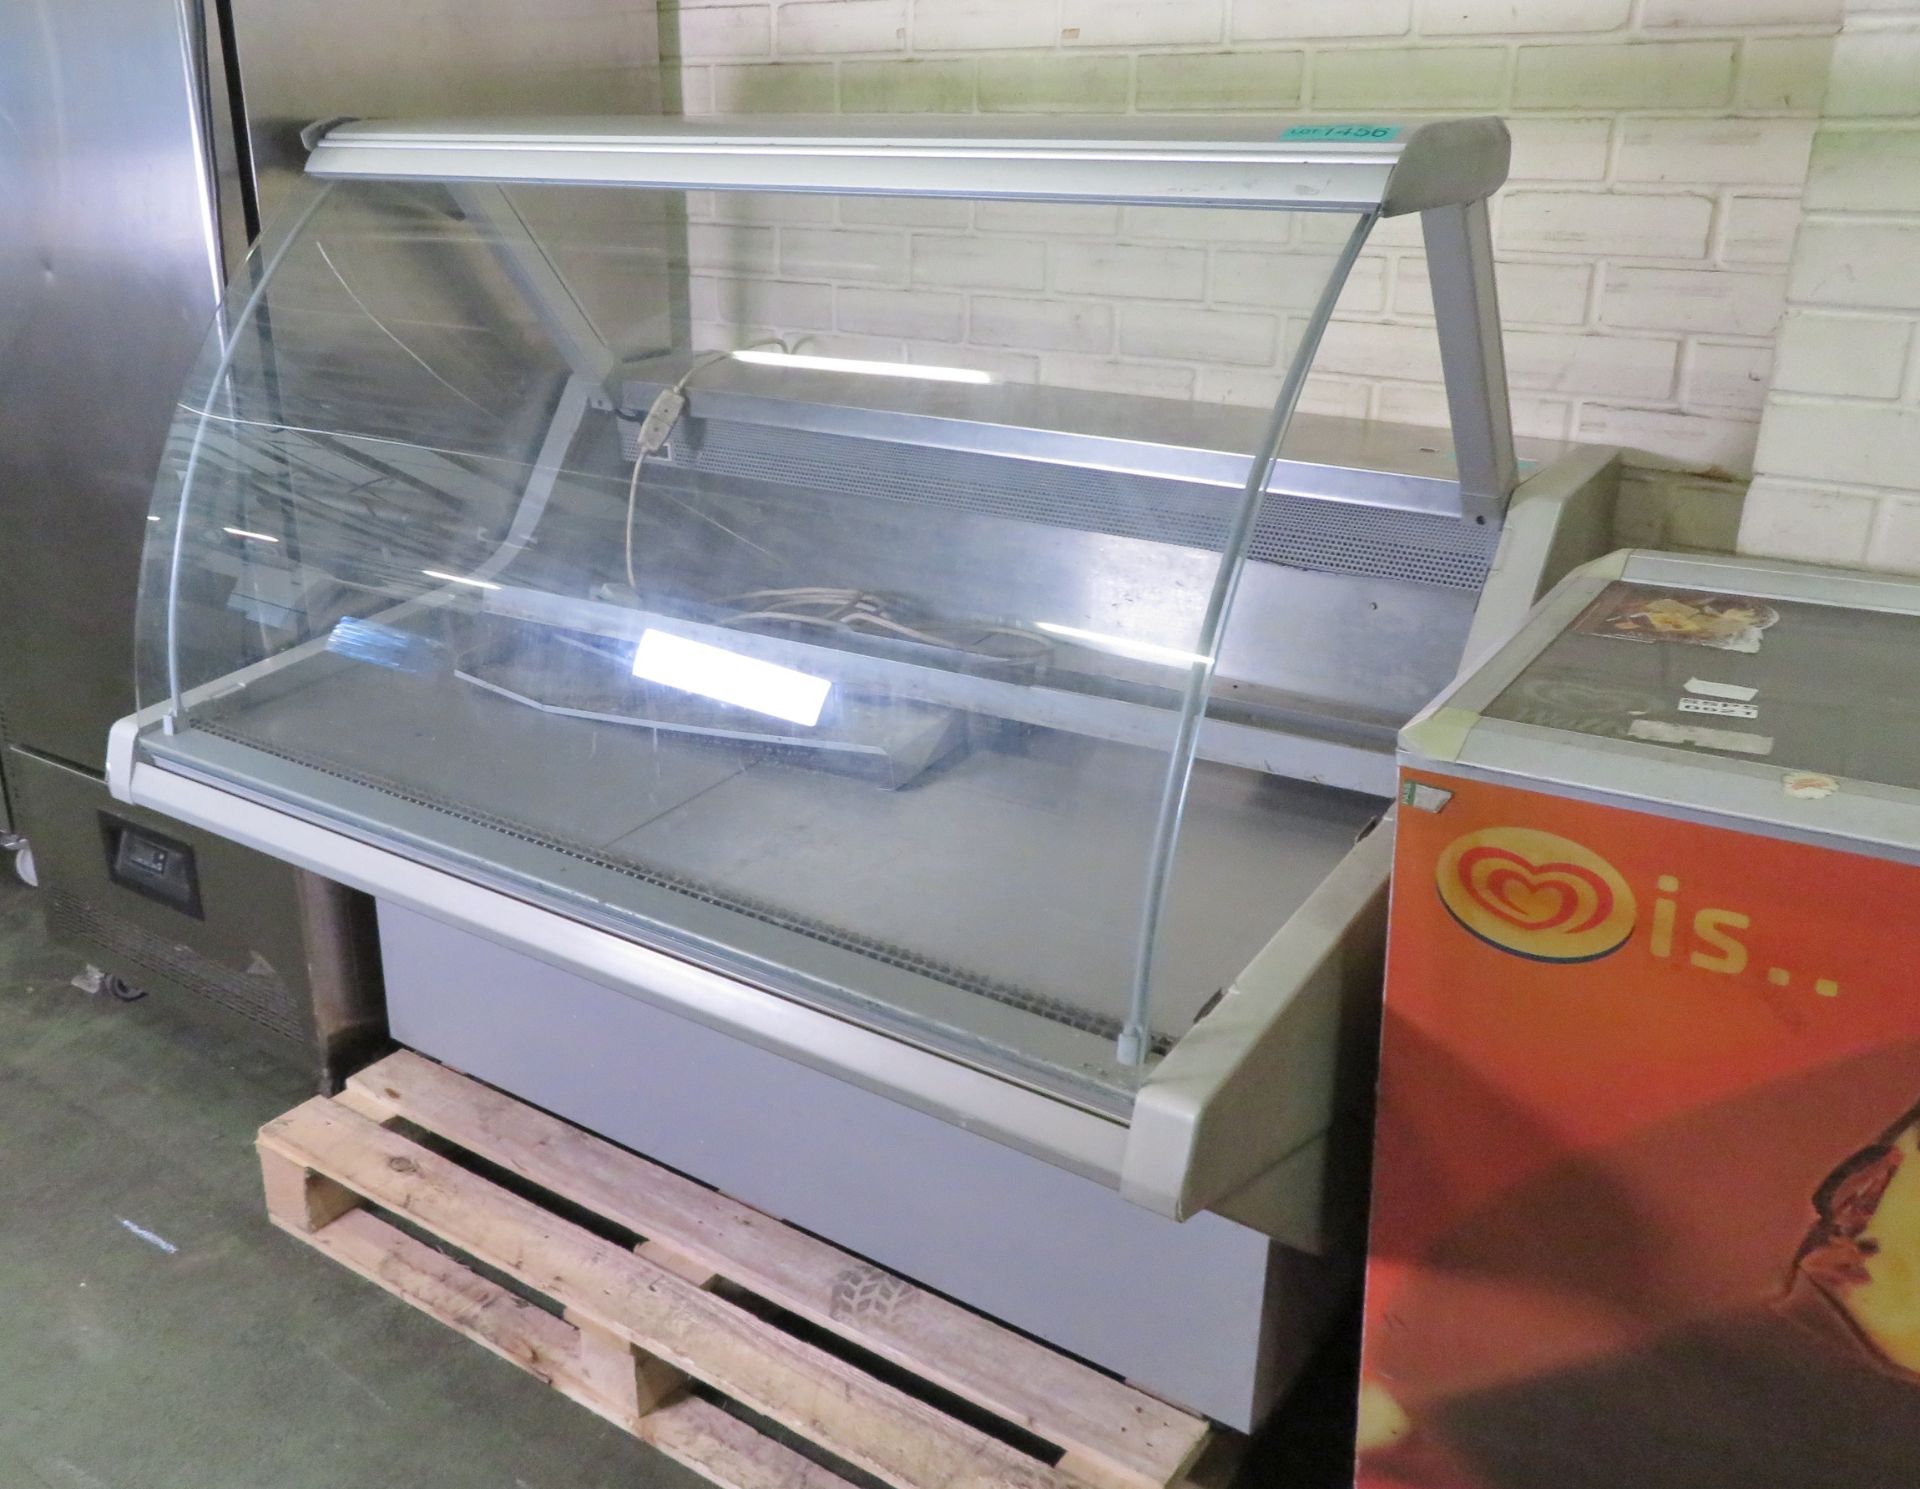 Linde Refrigerated Display Counter - Model -CRONOS X 125 - Image 2 of 3